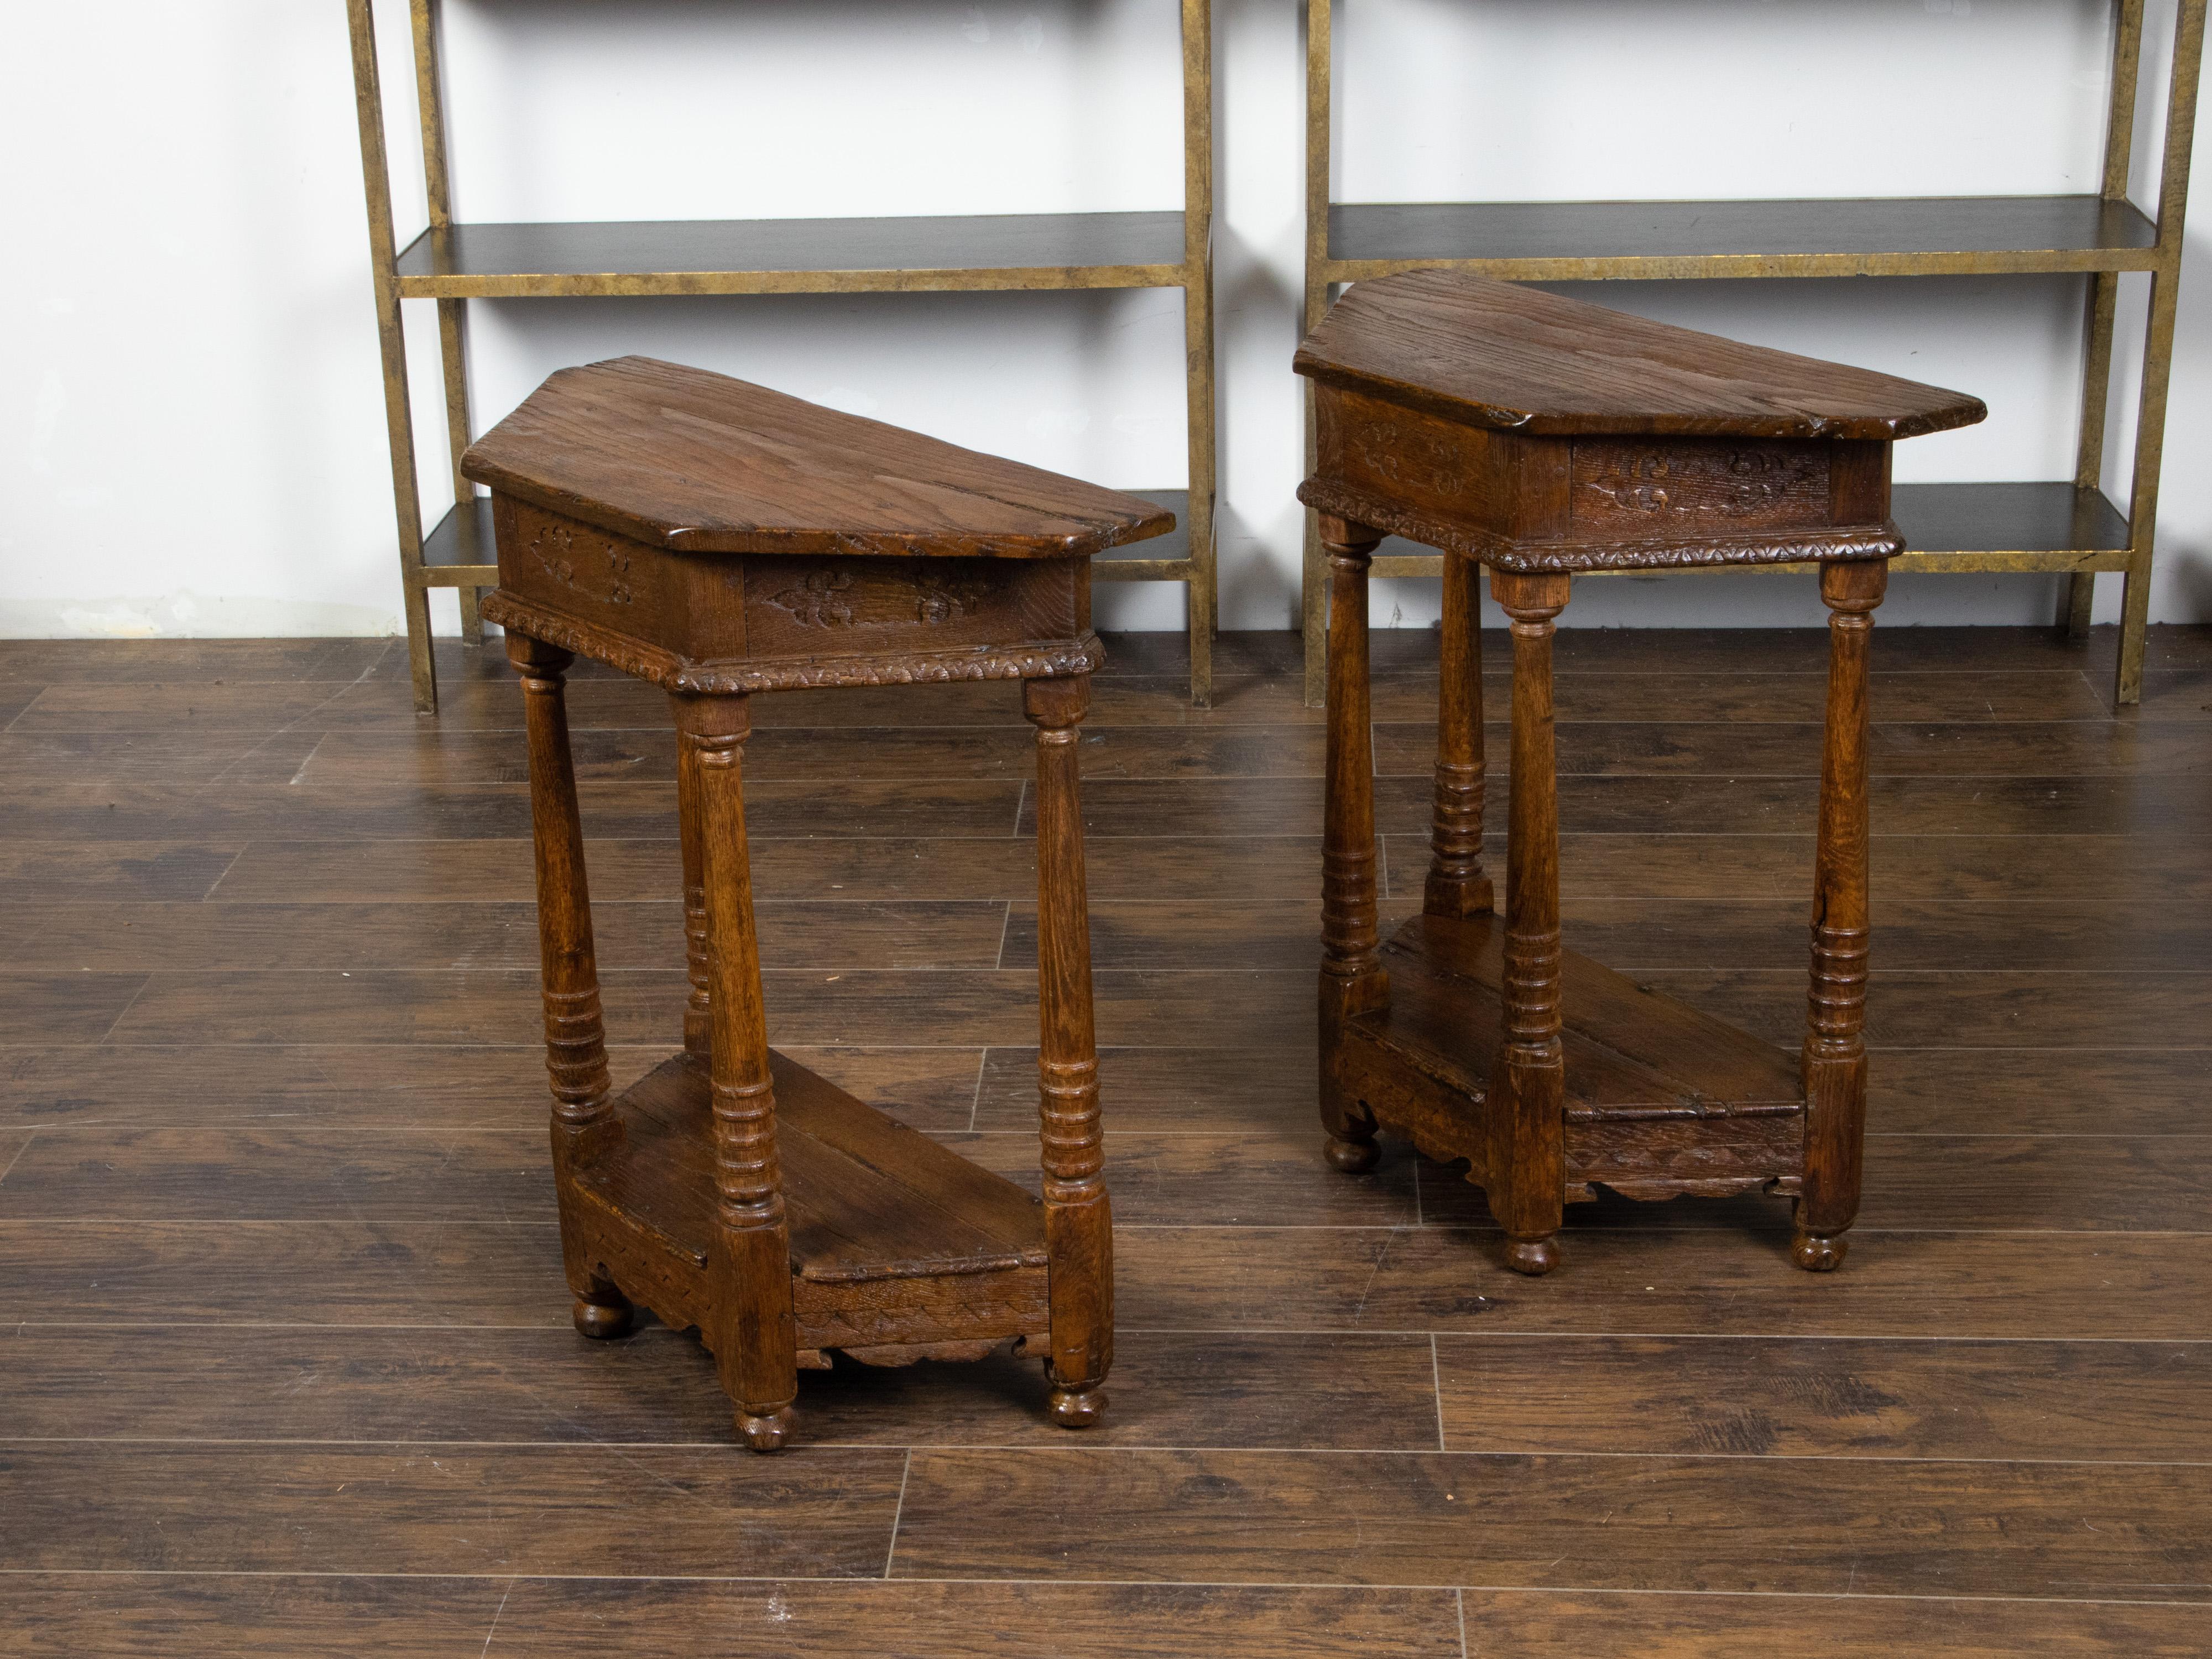 Pair of 19th Century English Carved Oak Demilune Tables with Column Legs For Sale 5